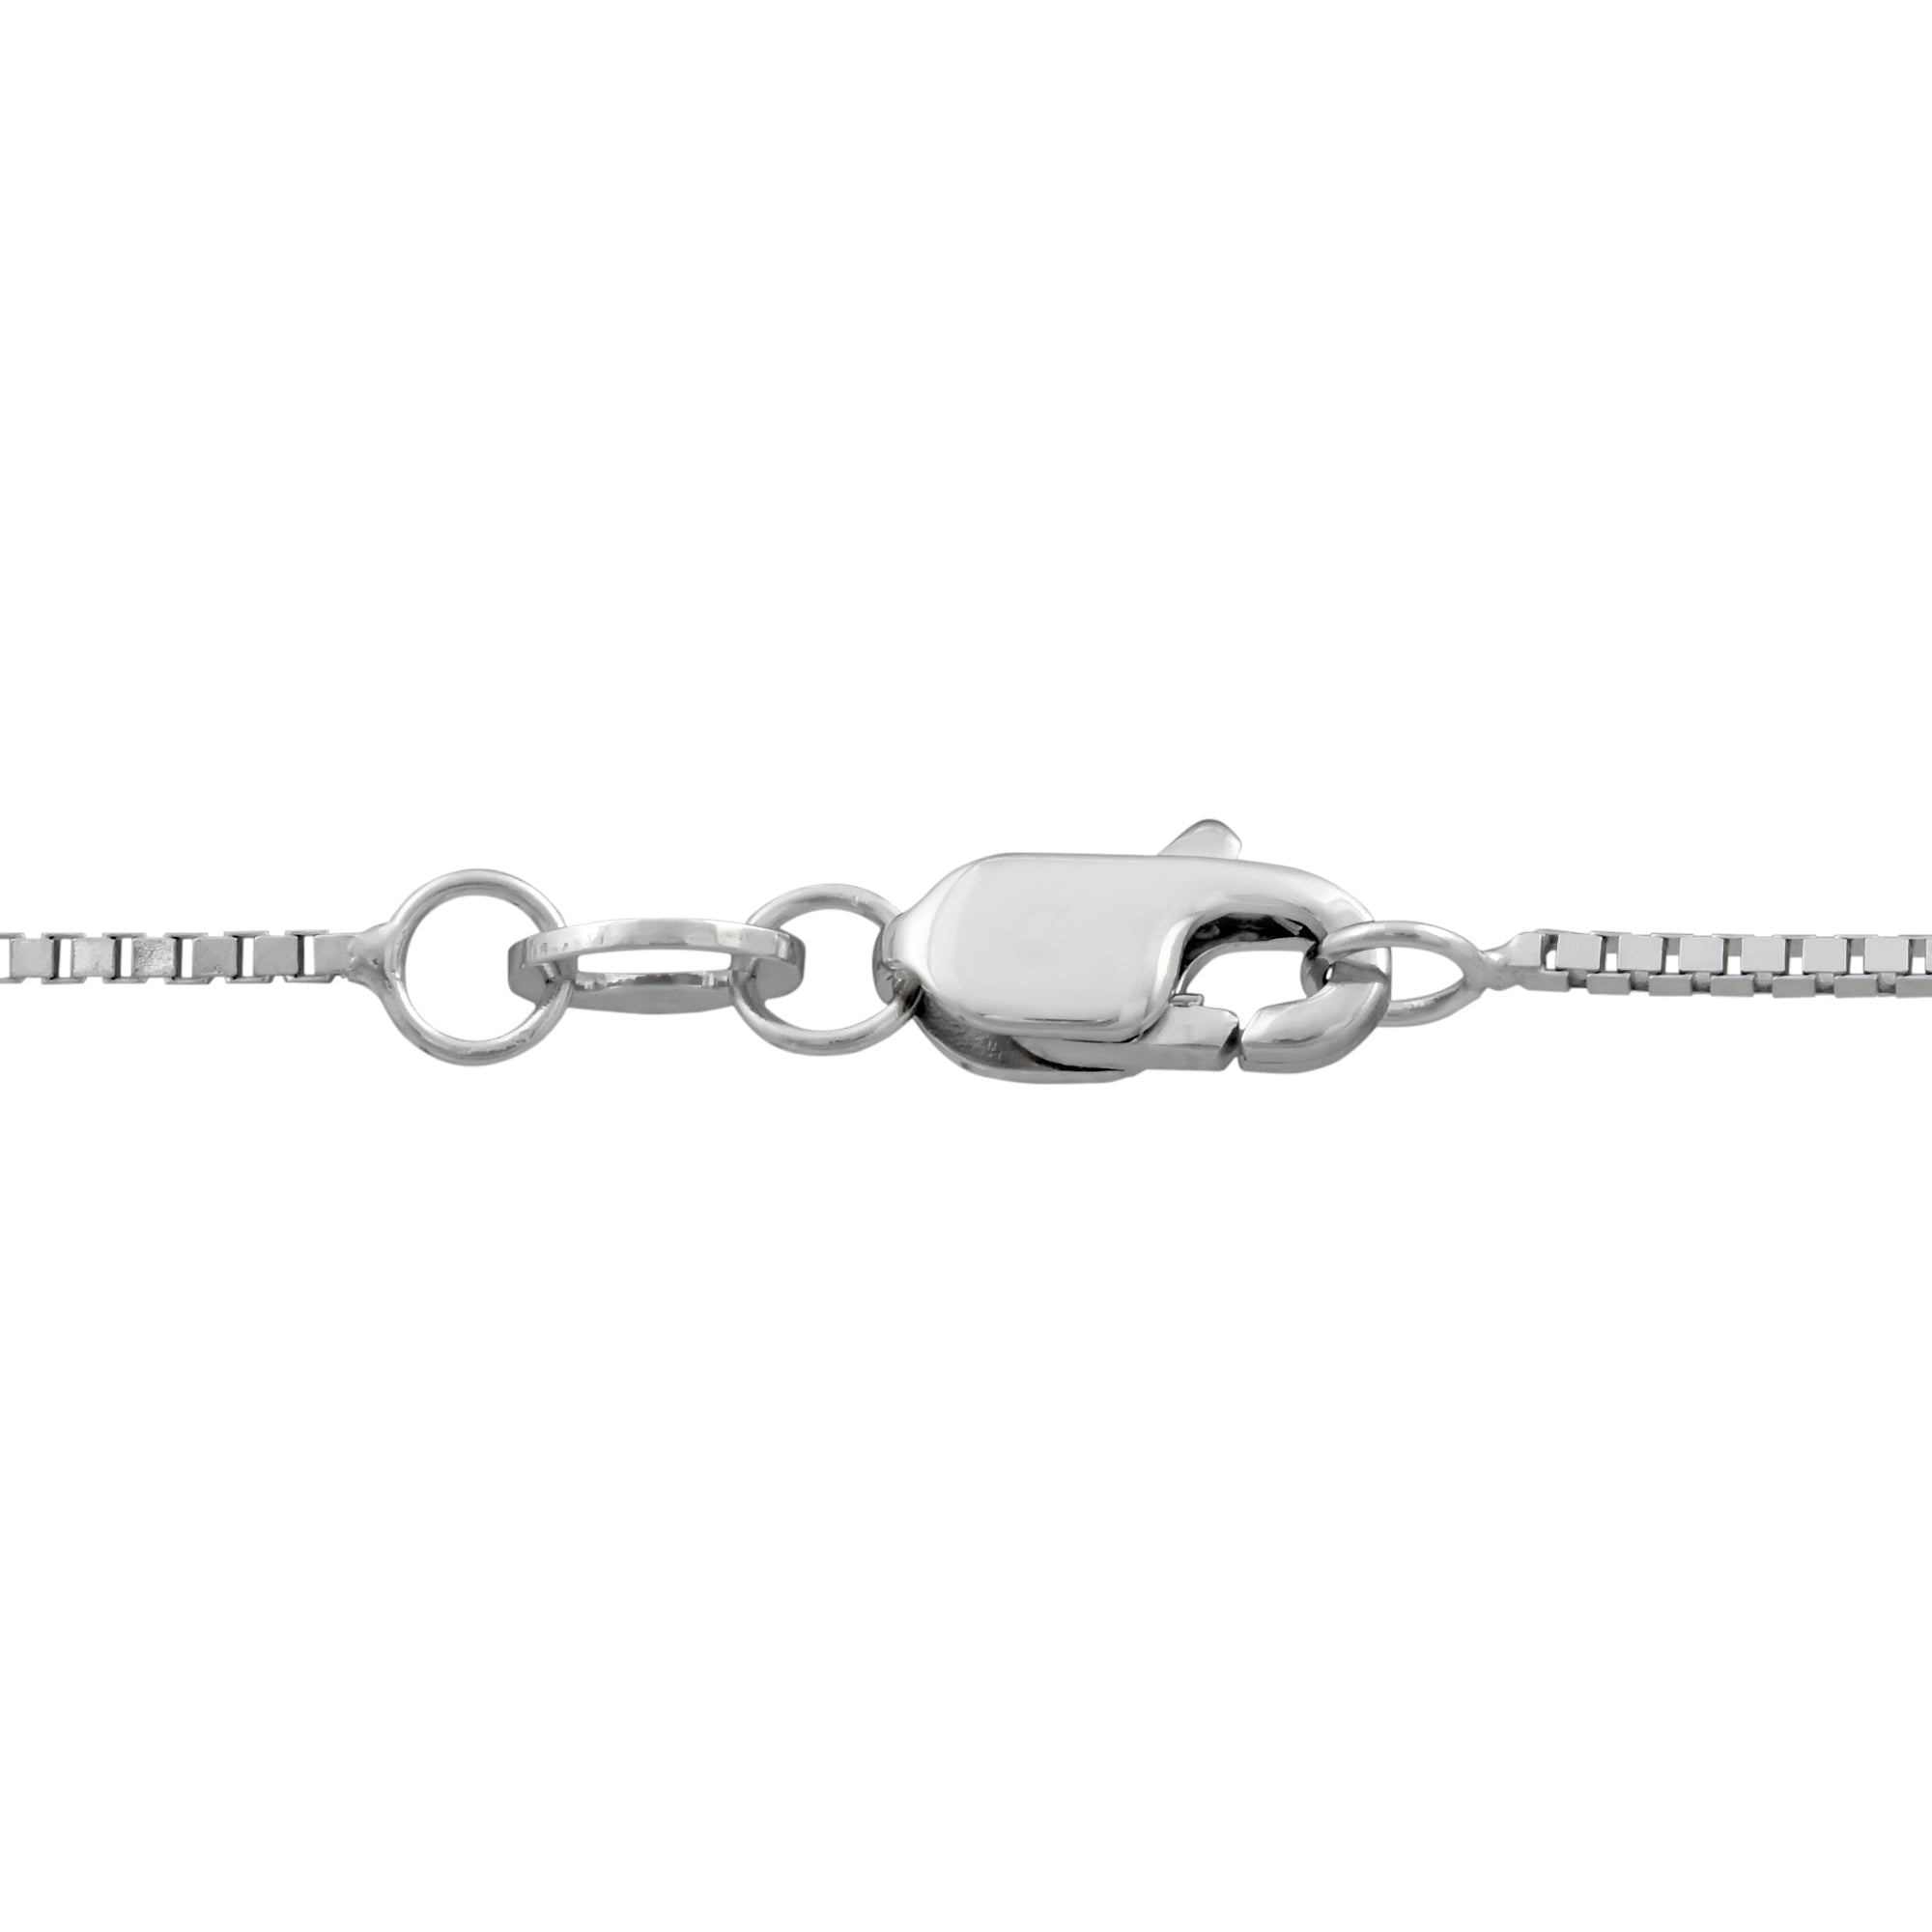 Box Chain in 14kt White Gold (20 inches and .8mm wide)